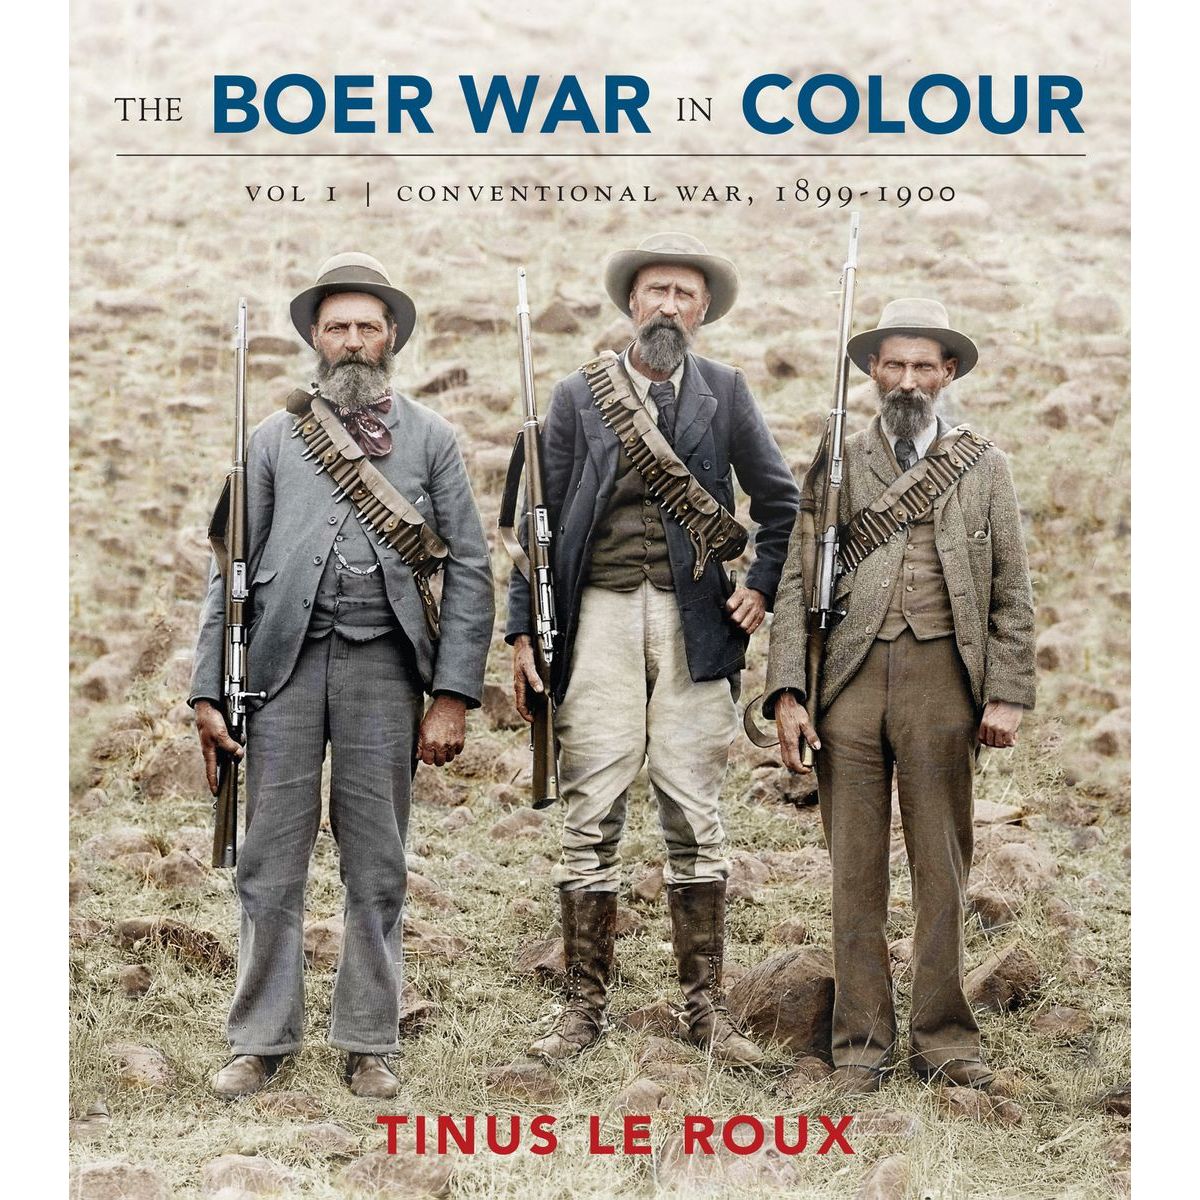 ISBN: 9781776191765 / 1776191765 - The Boer War in Colour Vol 1: Conventional War, 1899-1900 by Tinus le Roux [2022]